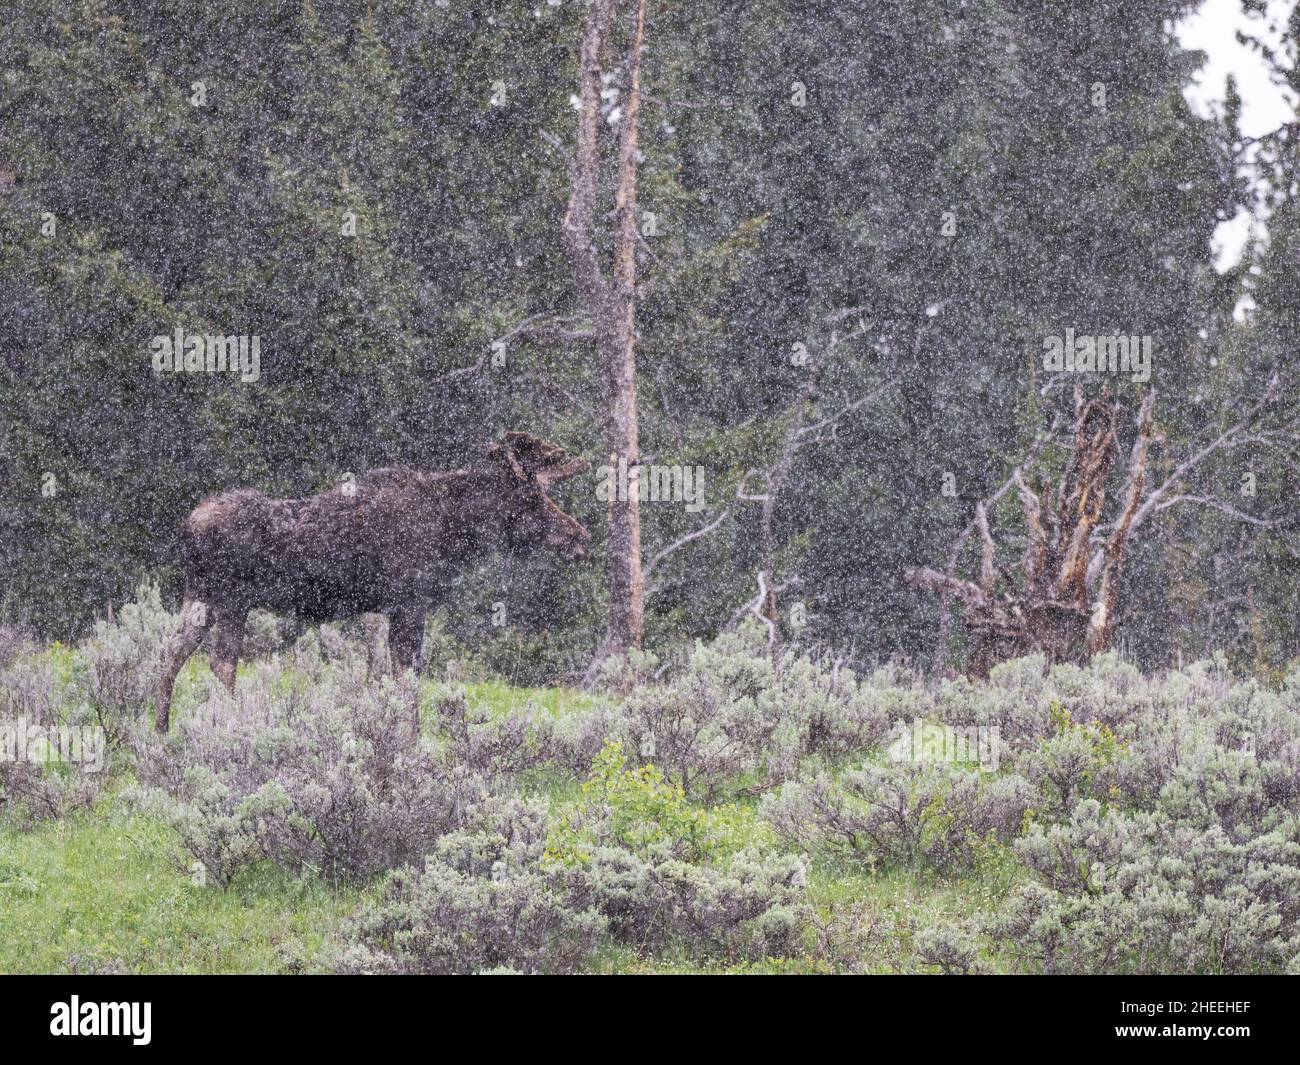 An adult bull moose, Alces alces, in a snowstorm in Yellowstone National Park, Wyoming. Stock Photo